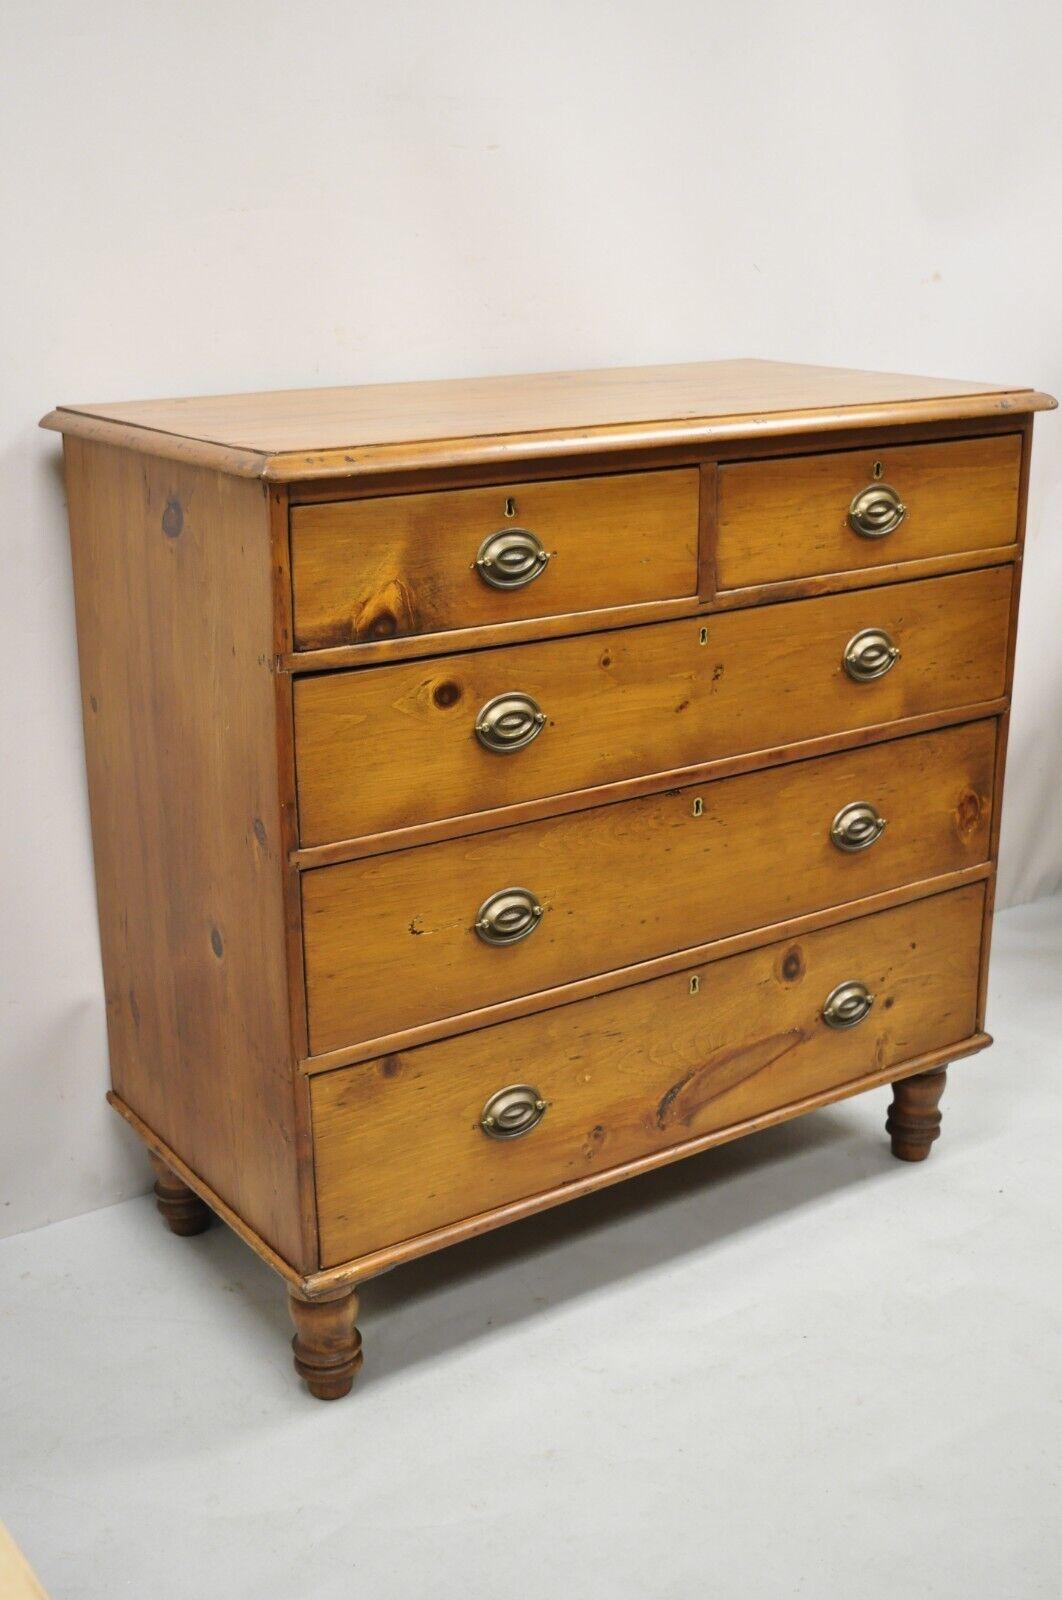 19th C. Antique Pine Wood 5 Drawer Primitive Colonial Chest Of Drawers Dresser. Item features turn carved bun feet, solid wood construction, beautiful wood grain, no key, but unlocked, 5 dovetailed drawers, very nice antique item, quality American